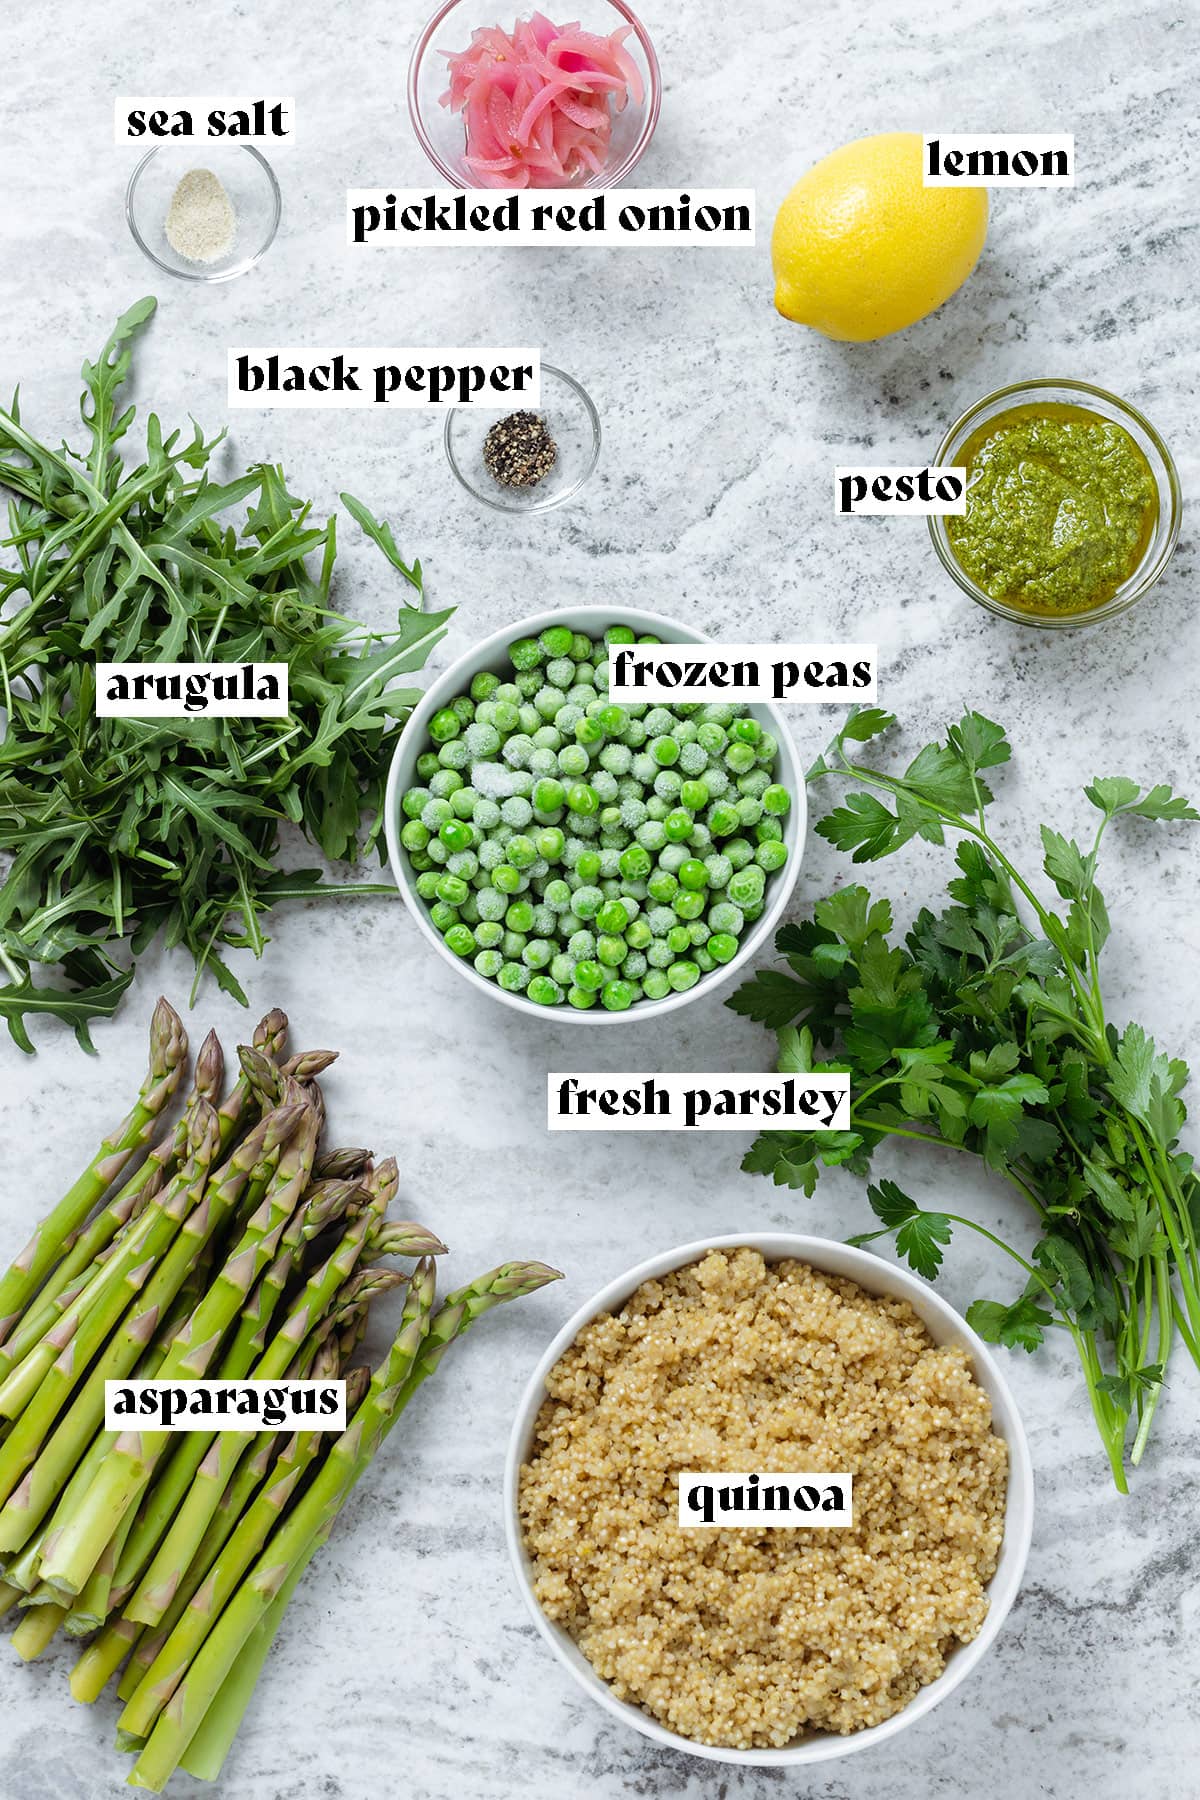 Asparagus, arugula, frozen peas, quinoa, and other ingredients laid out on a stone background.